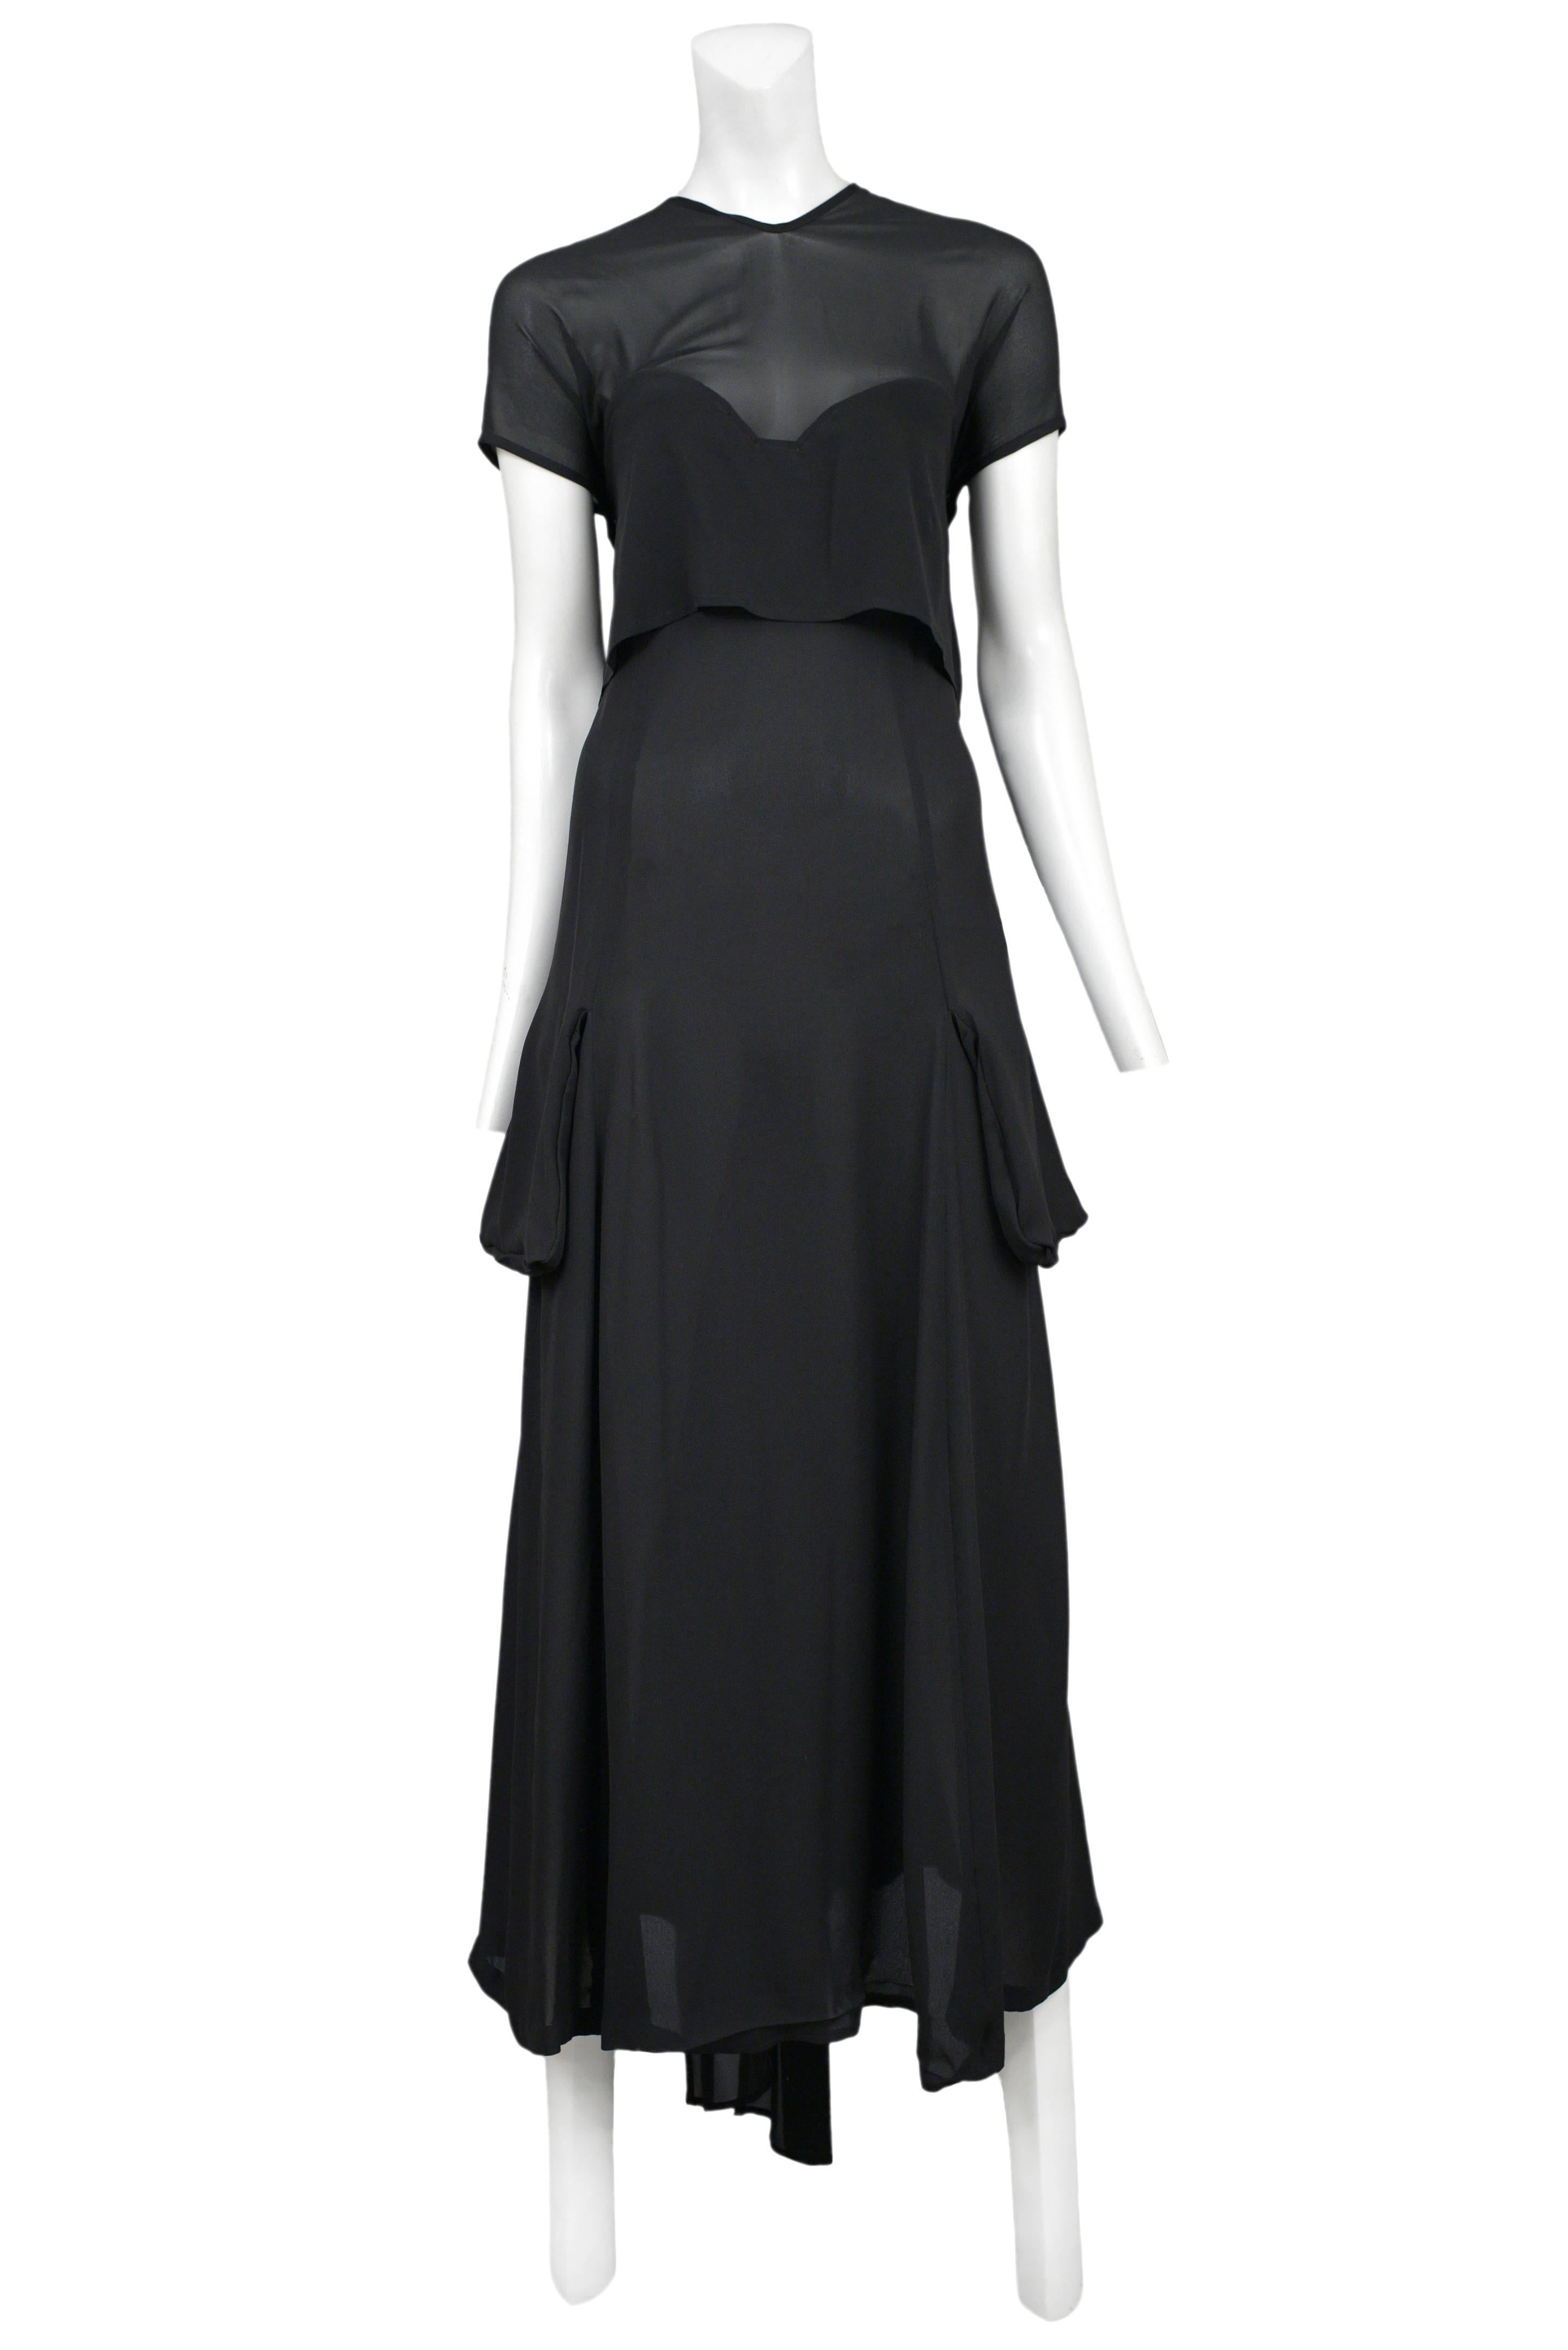 Vintage Yohji Yamamoto black chiffon gown featuring short sleeves, a v-neckline, additional inside layer to cover the curve of the bust, and a tie closure at the back.
Please inquire for additional images.